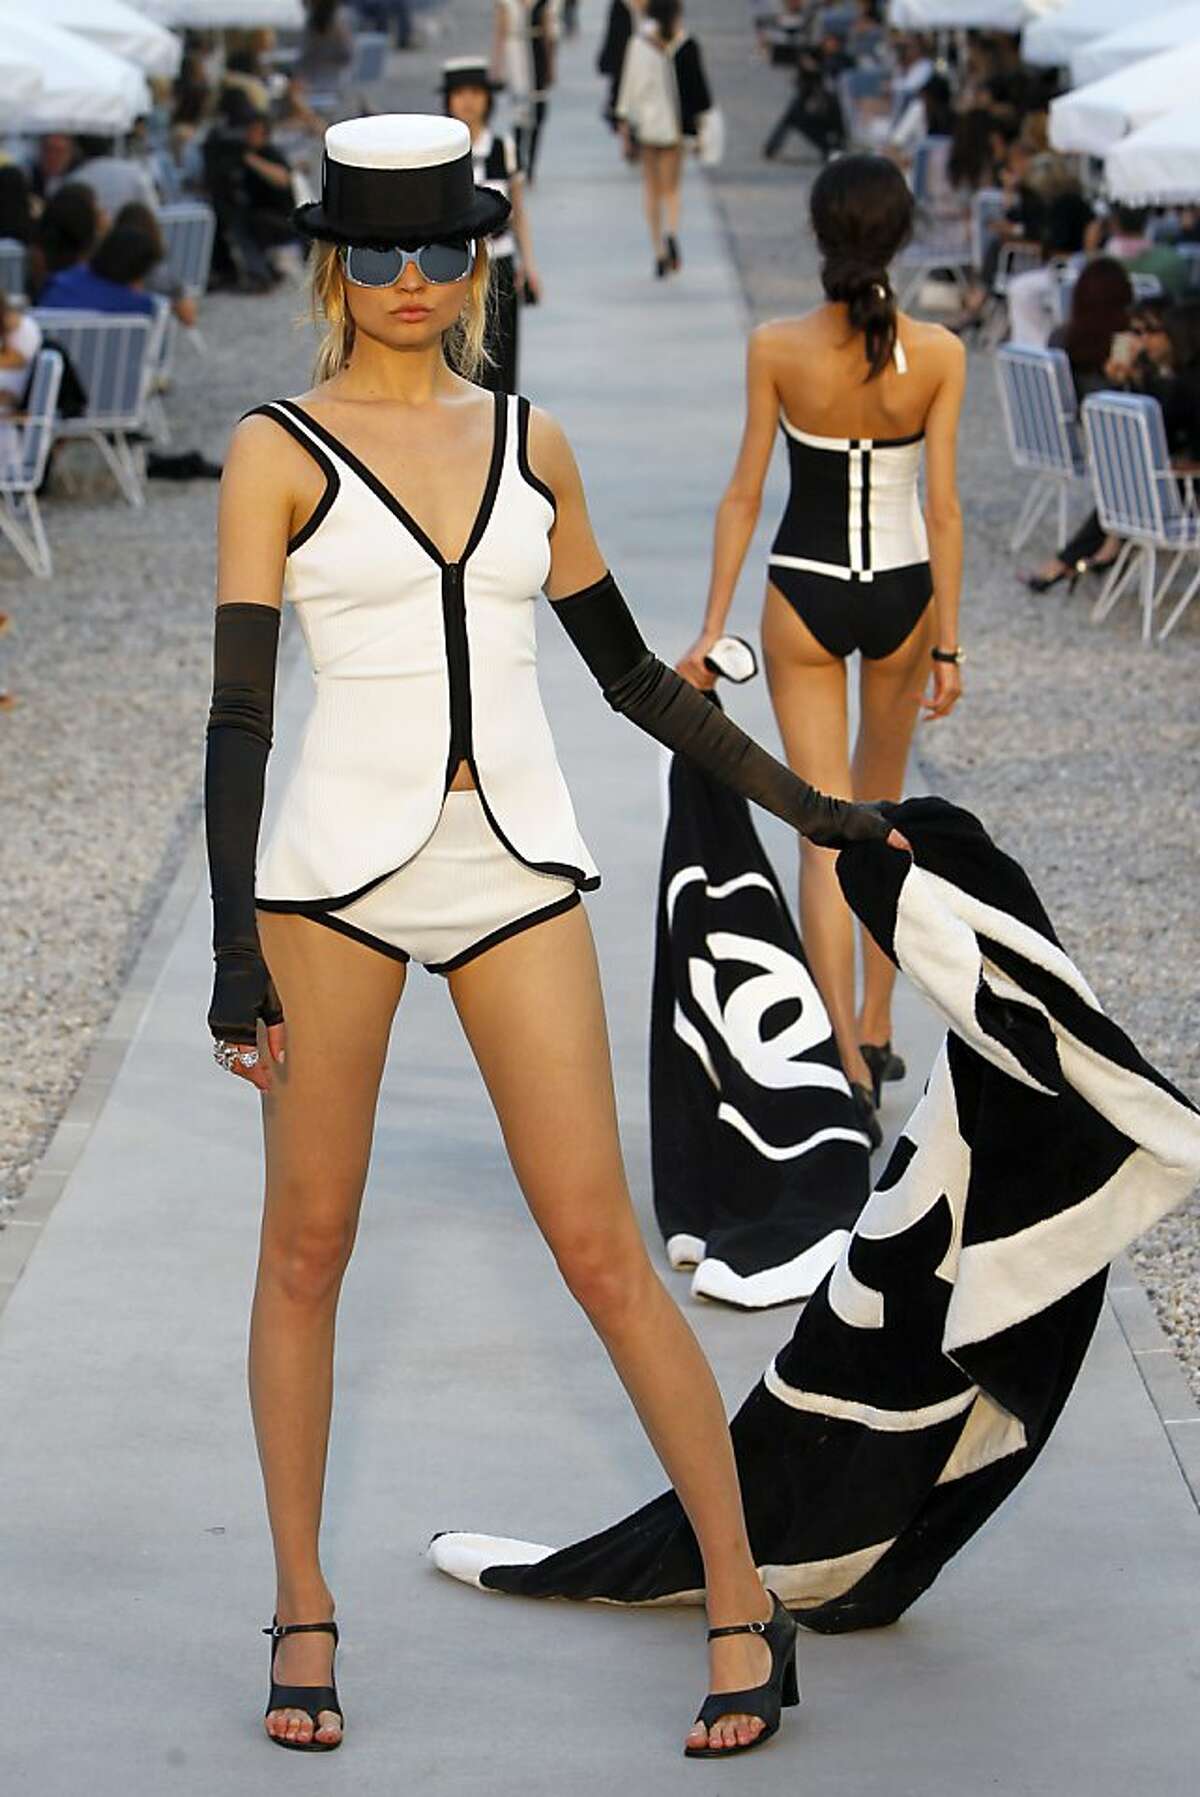 Karl Lagerfeld unveils new Chanel designs at the Cap d'Antibes